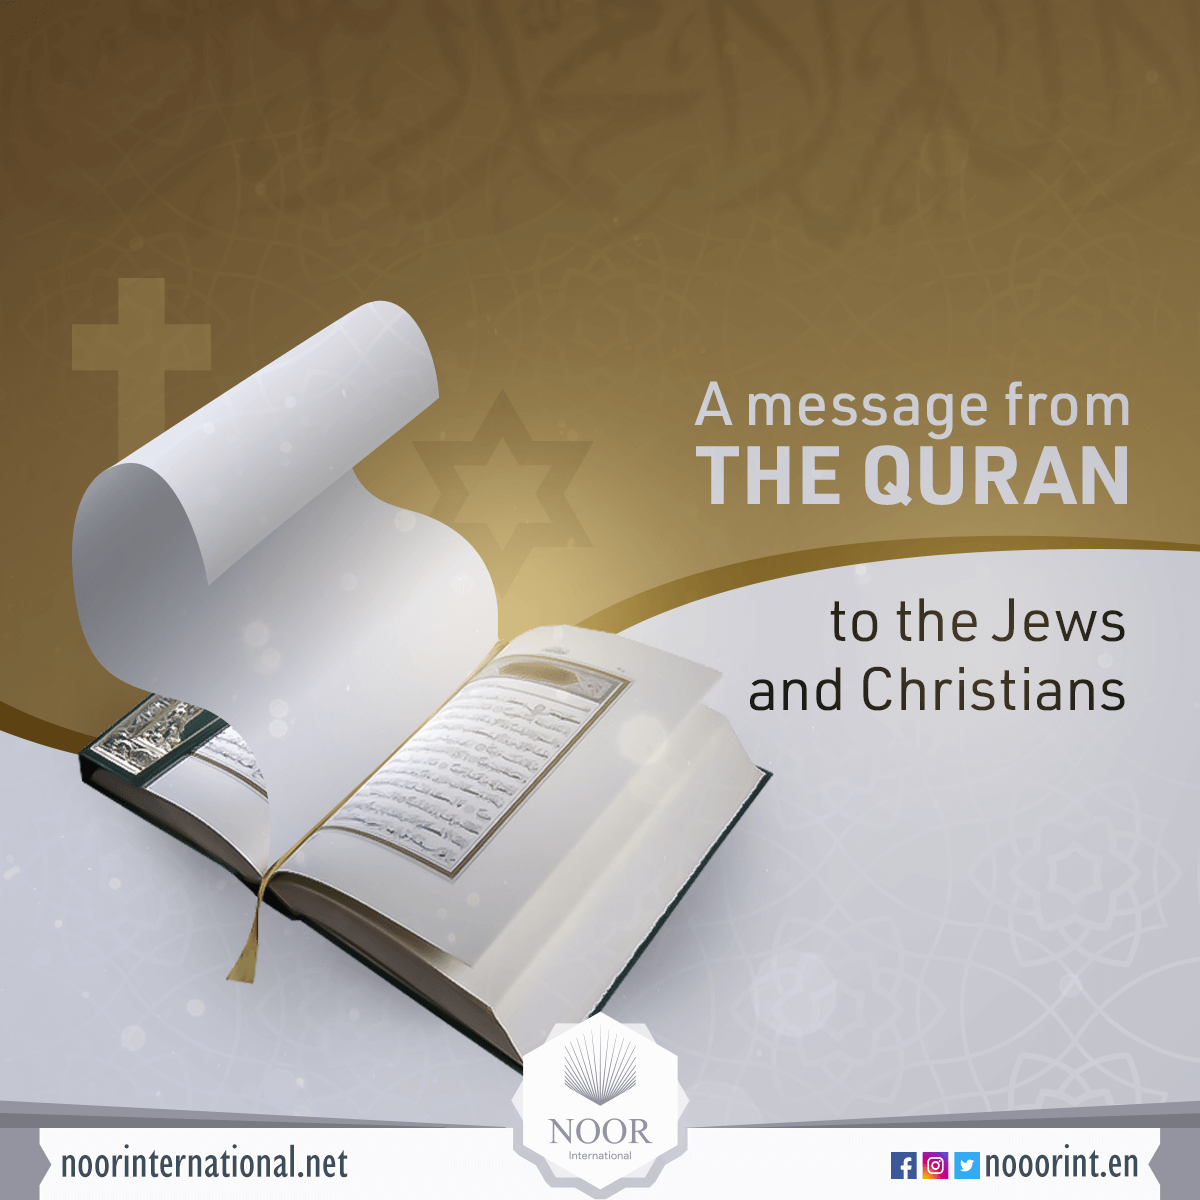 A message from the Quran to the Jews and Christians